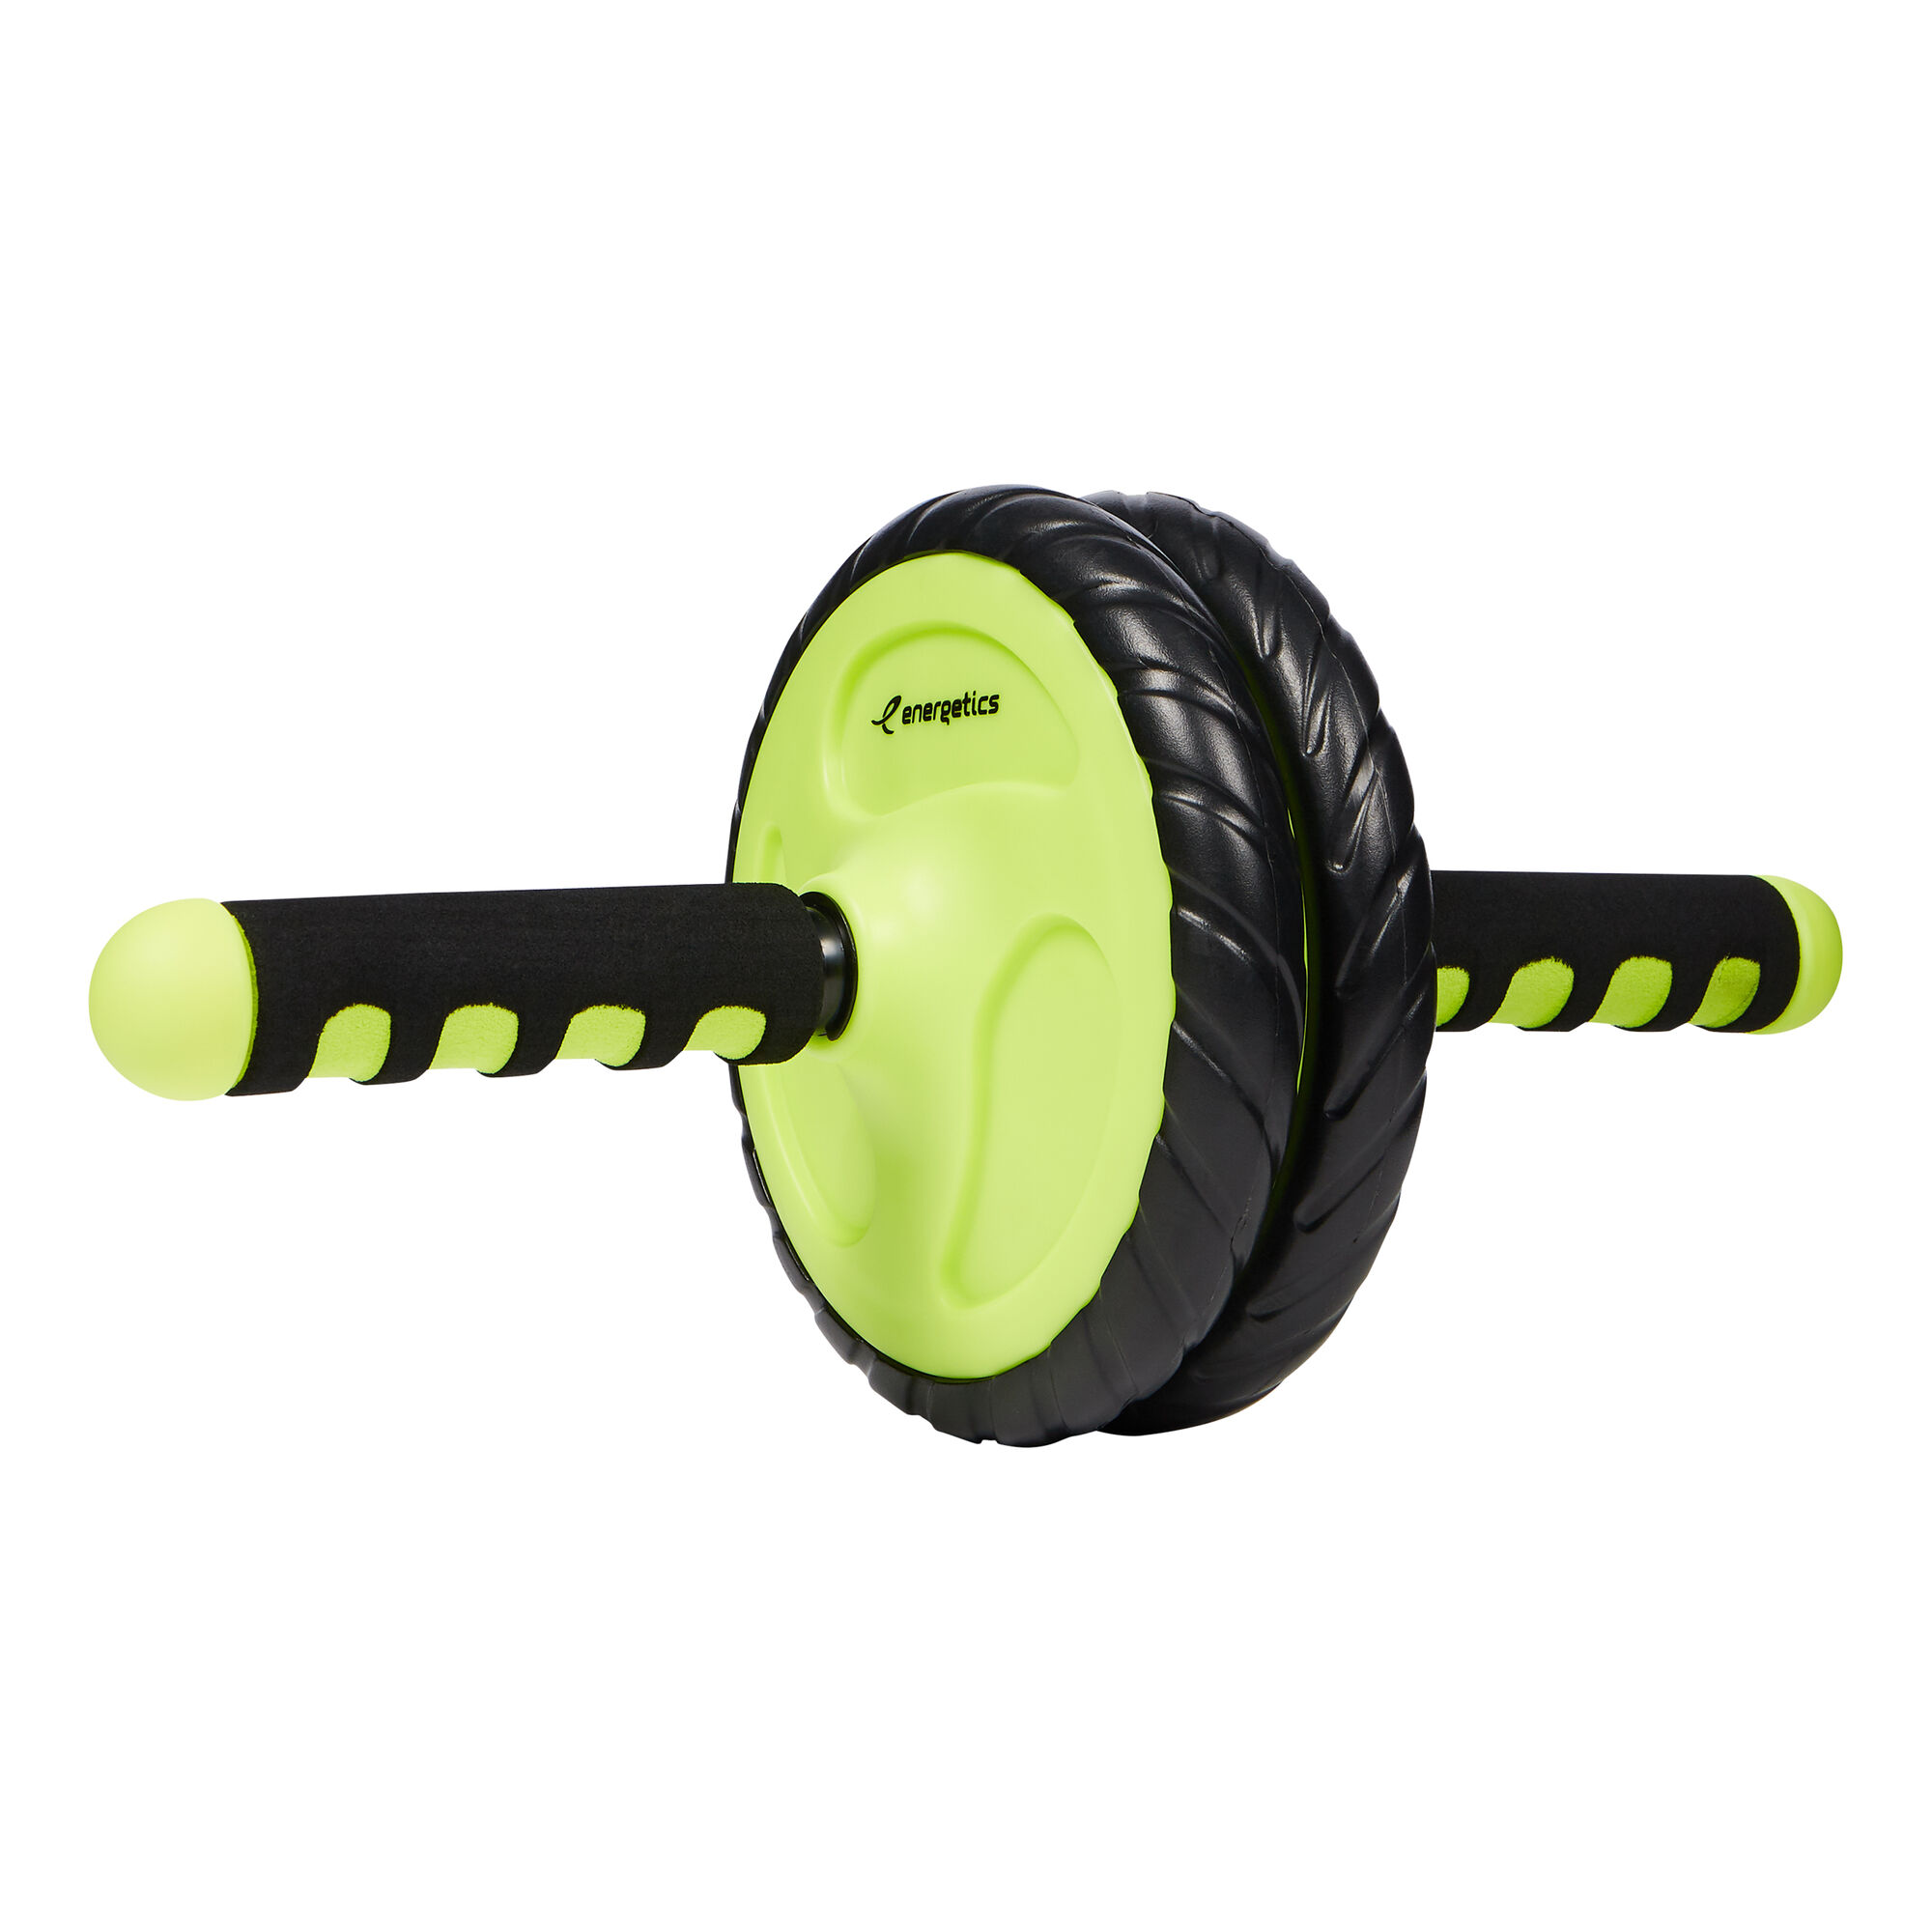 Buy Energetics AB Pro | Training COM online Roller Point Device Black, Bauchtrainer Yellow Tennis